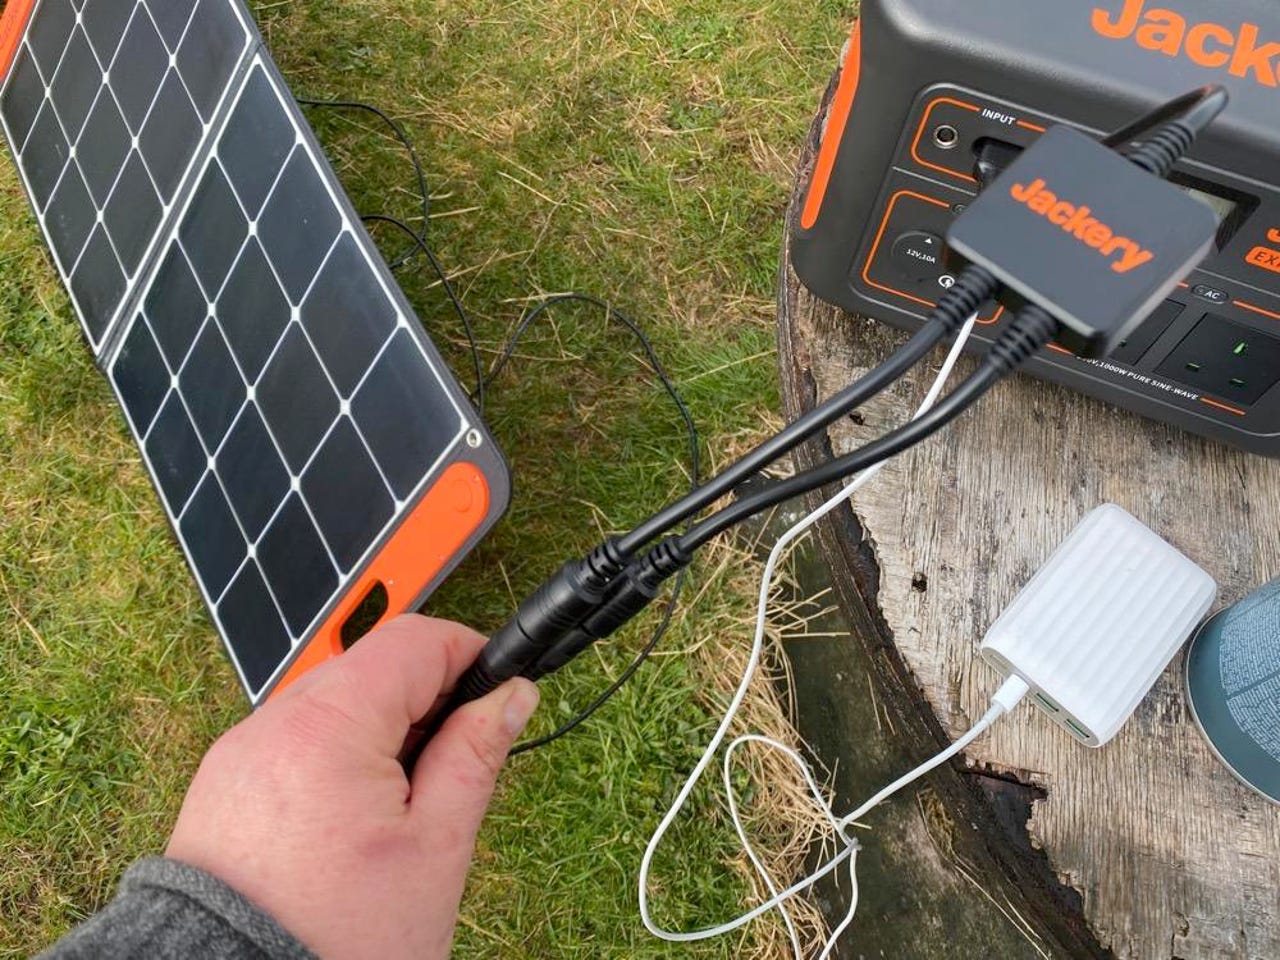 The Y-cable that hooks up two solar panels to the Explorer 1000